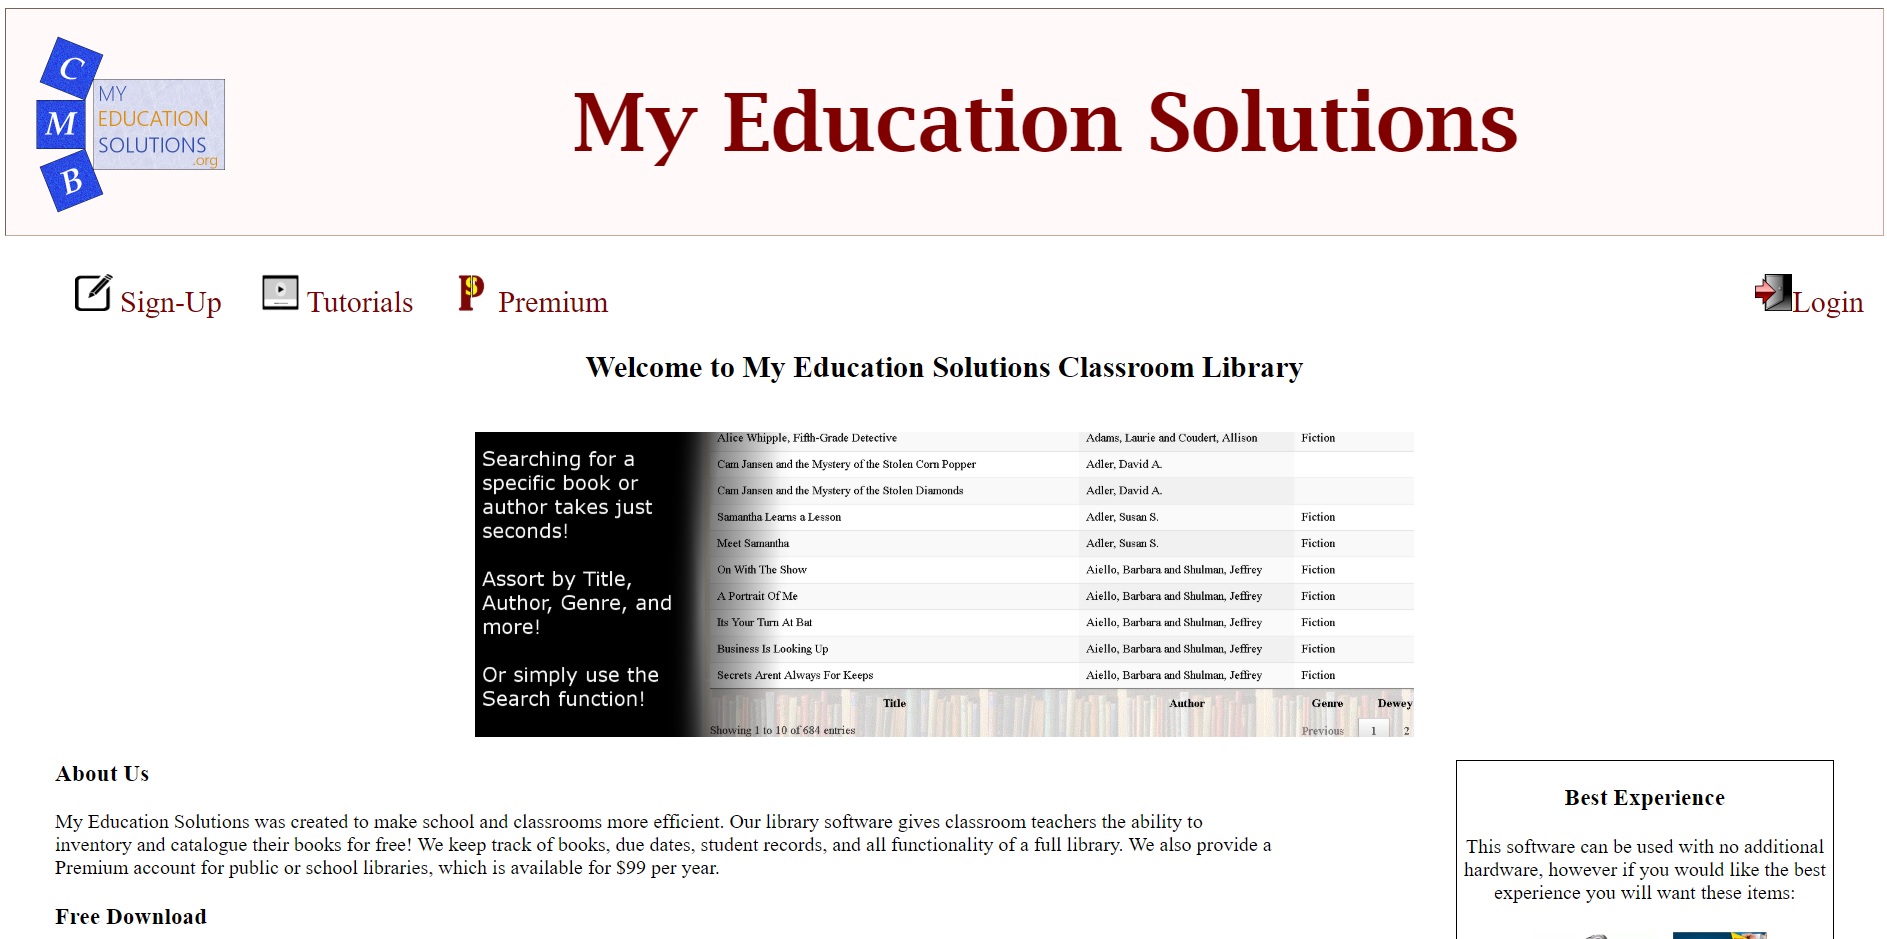 My Education Solutions